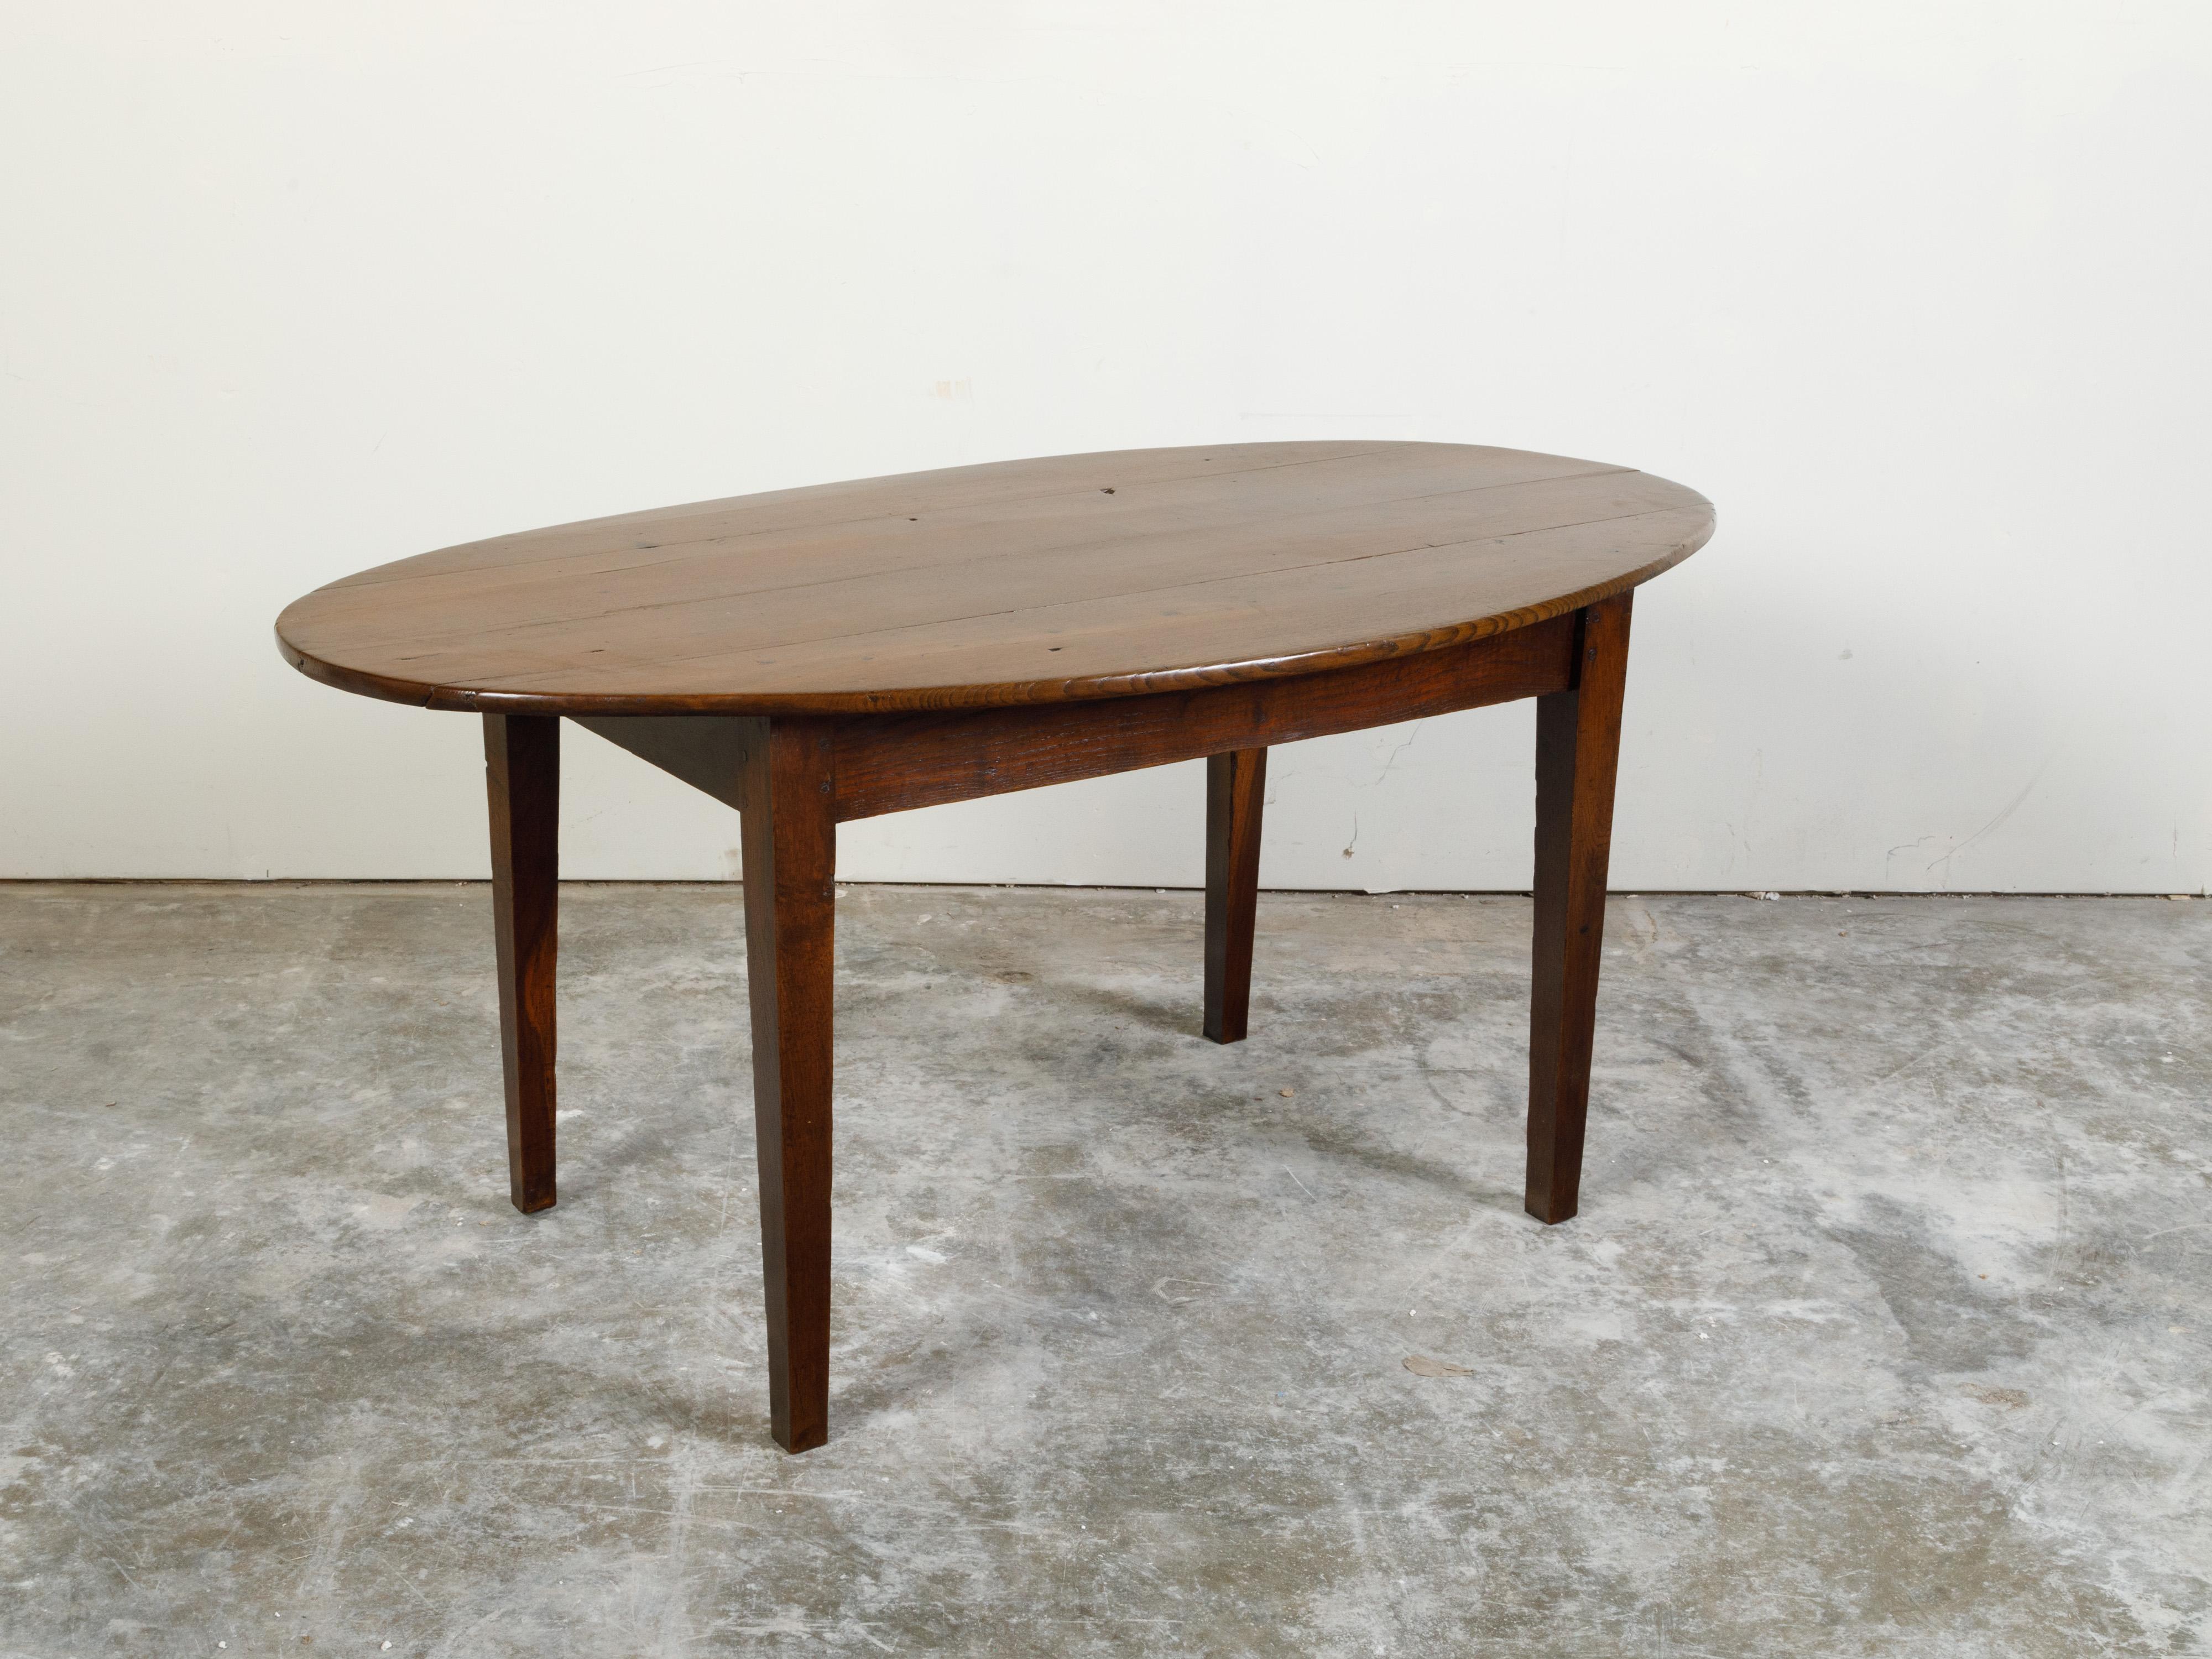 English 19th Century Walnut Table with Oval Top, Tapered Legs and Dark Patina For Sale 2